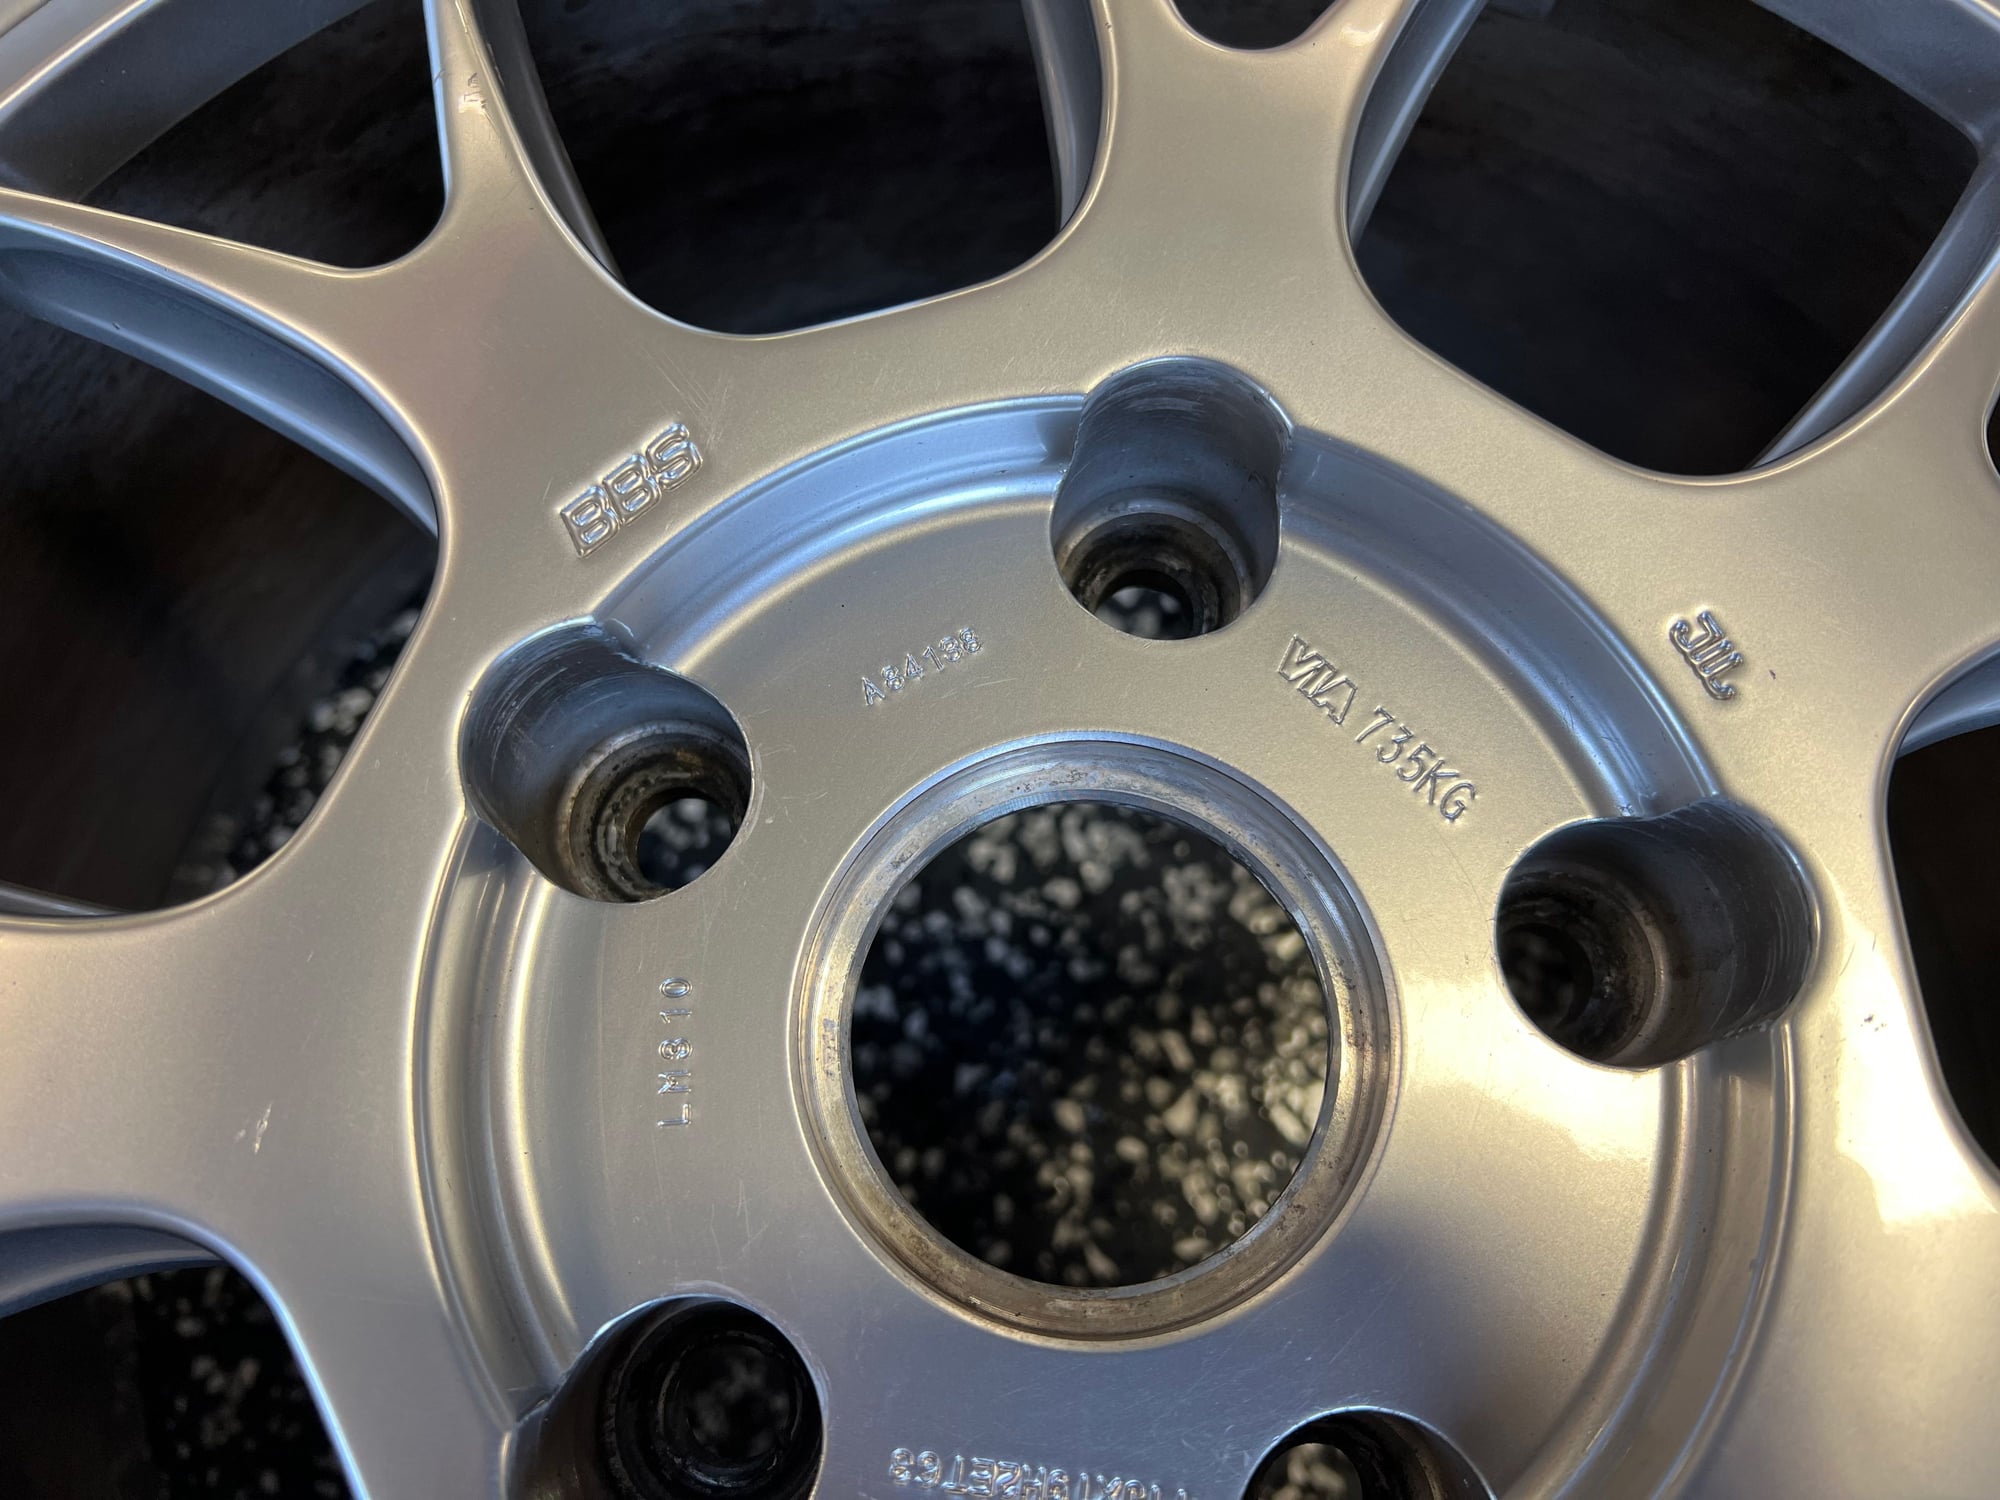 Wheels and Tires/Axles - BBS LM-R Porsche 997 911 19 Inch Wheels - Used - 2006 to 2011 Porsche 911 - West Chester, PA 19382, United States